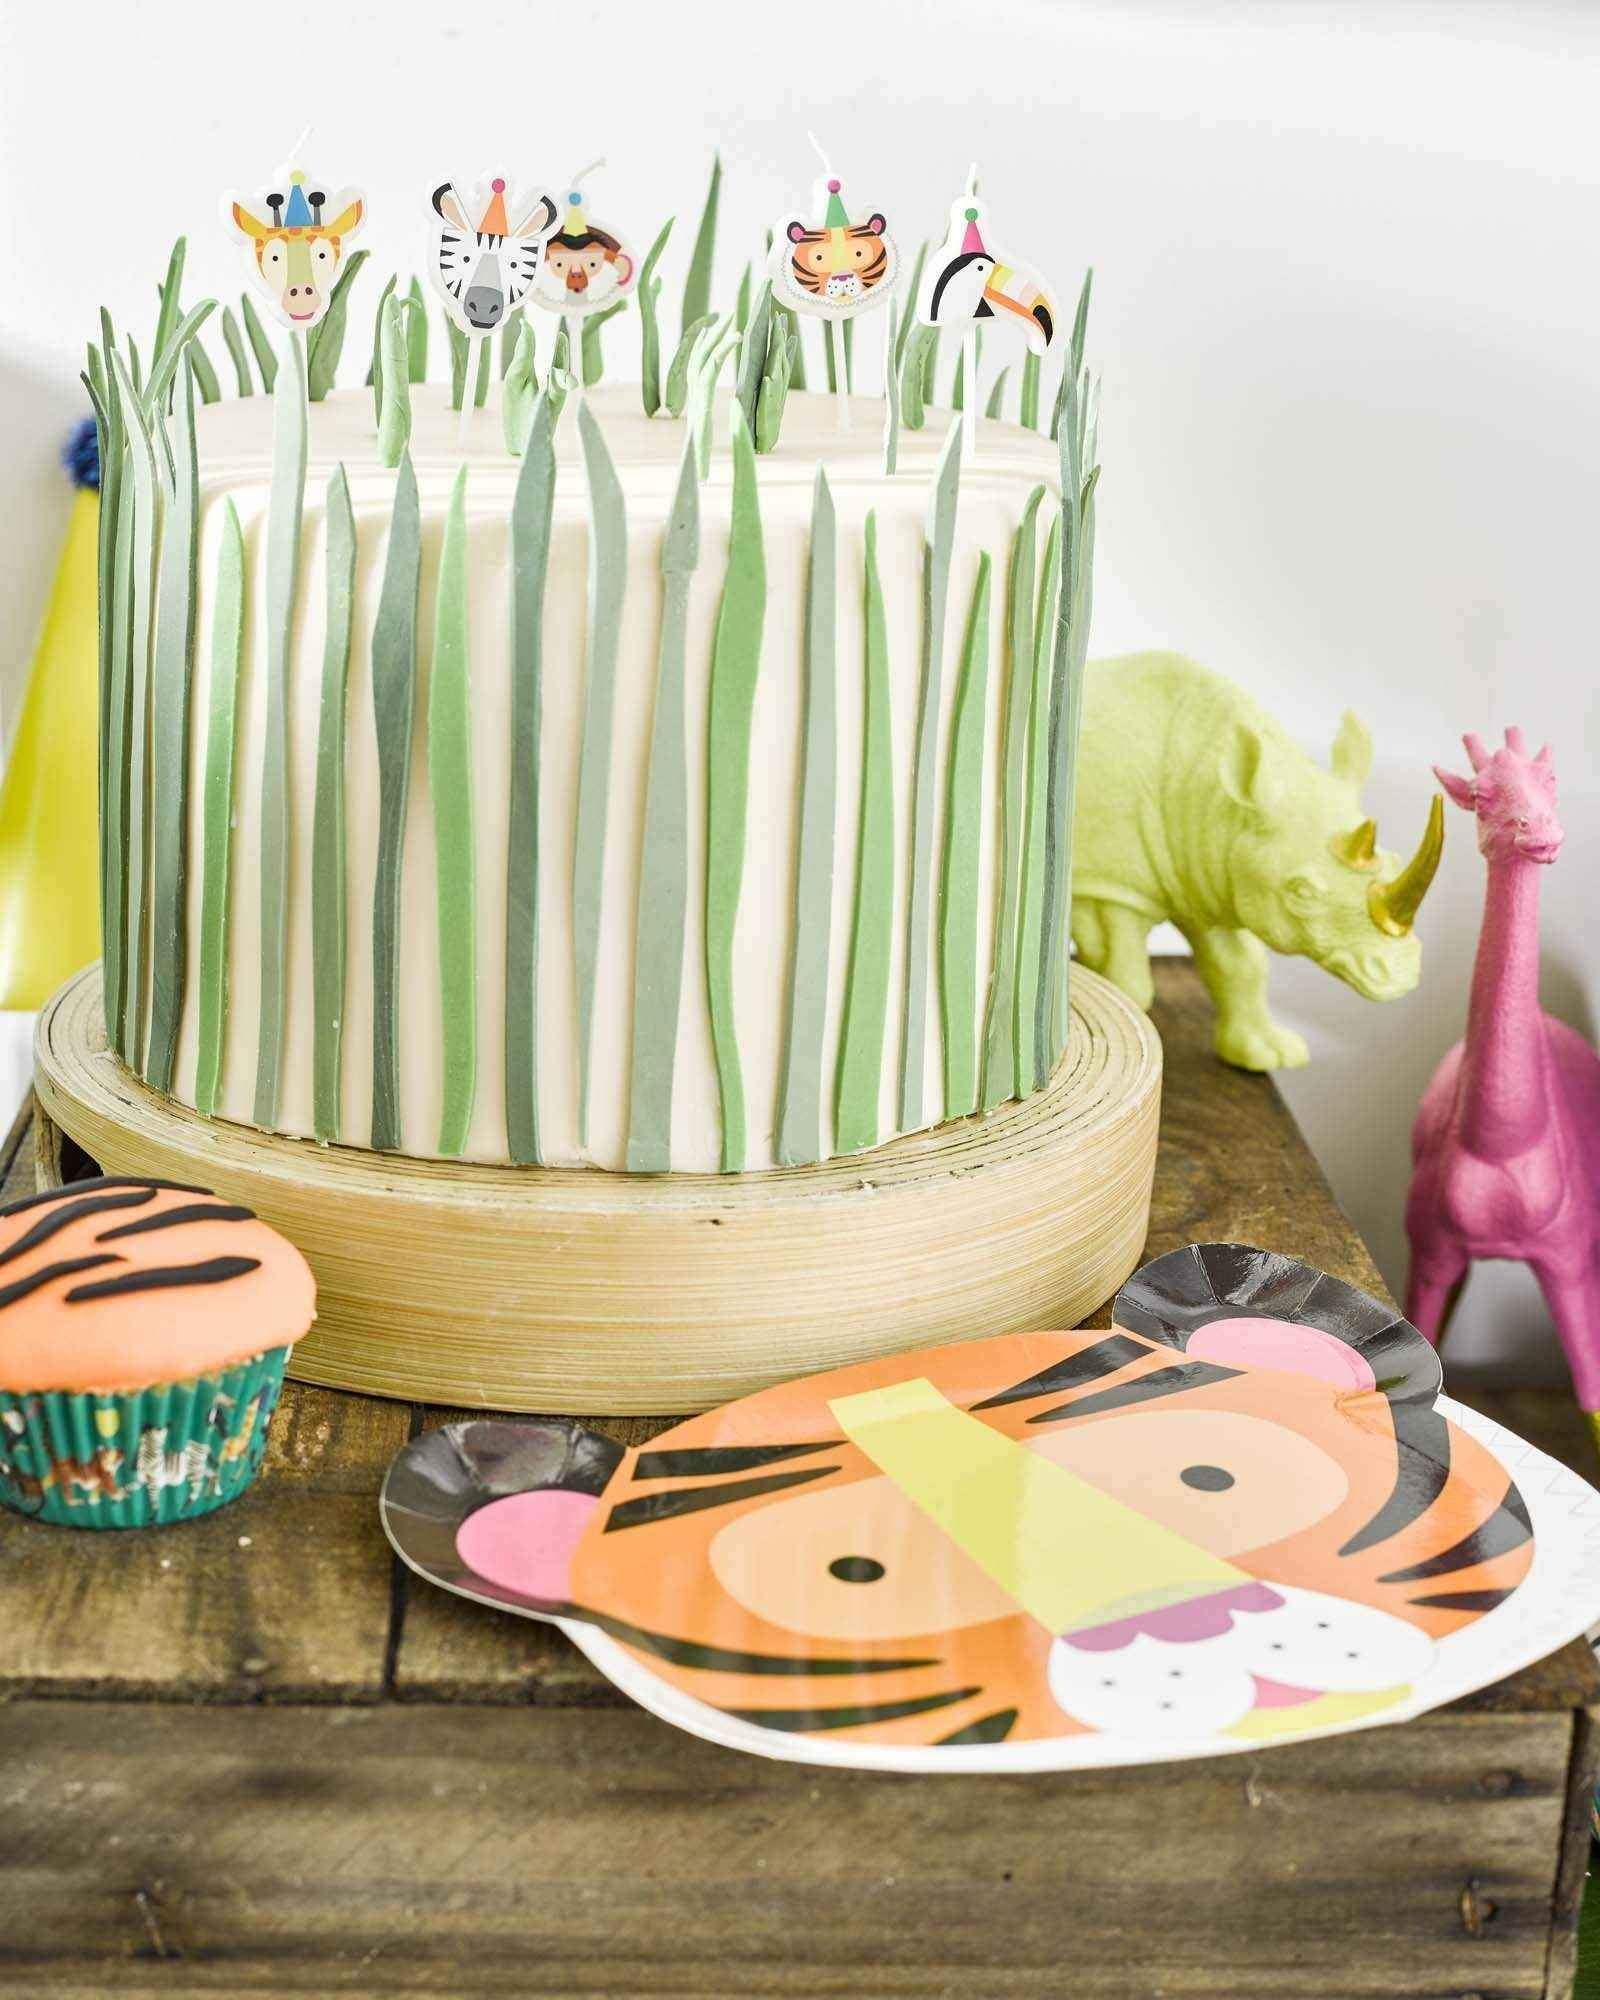 Sloth Party Animal Ceramic Cake Topper by Camp Hollow – Junior Edition